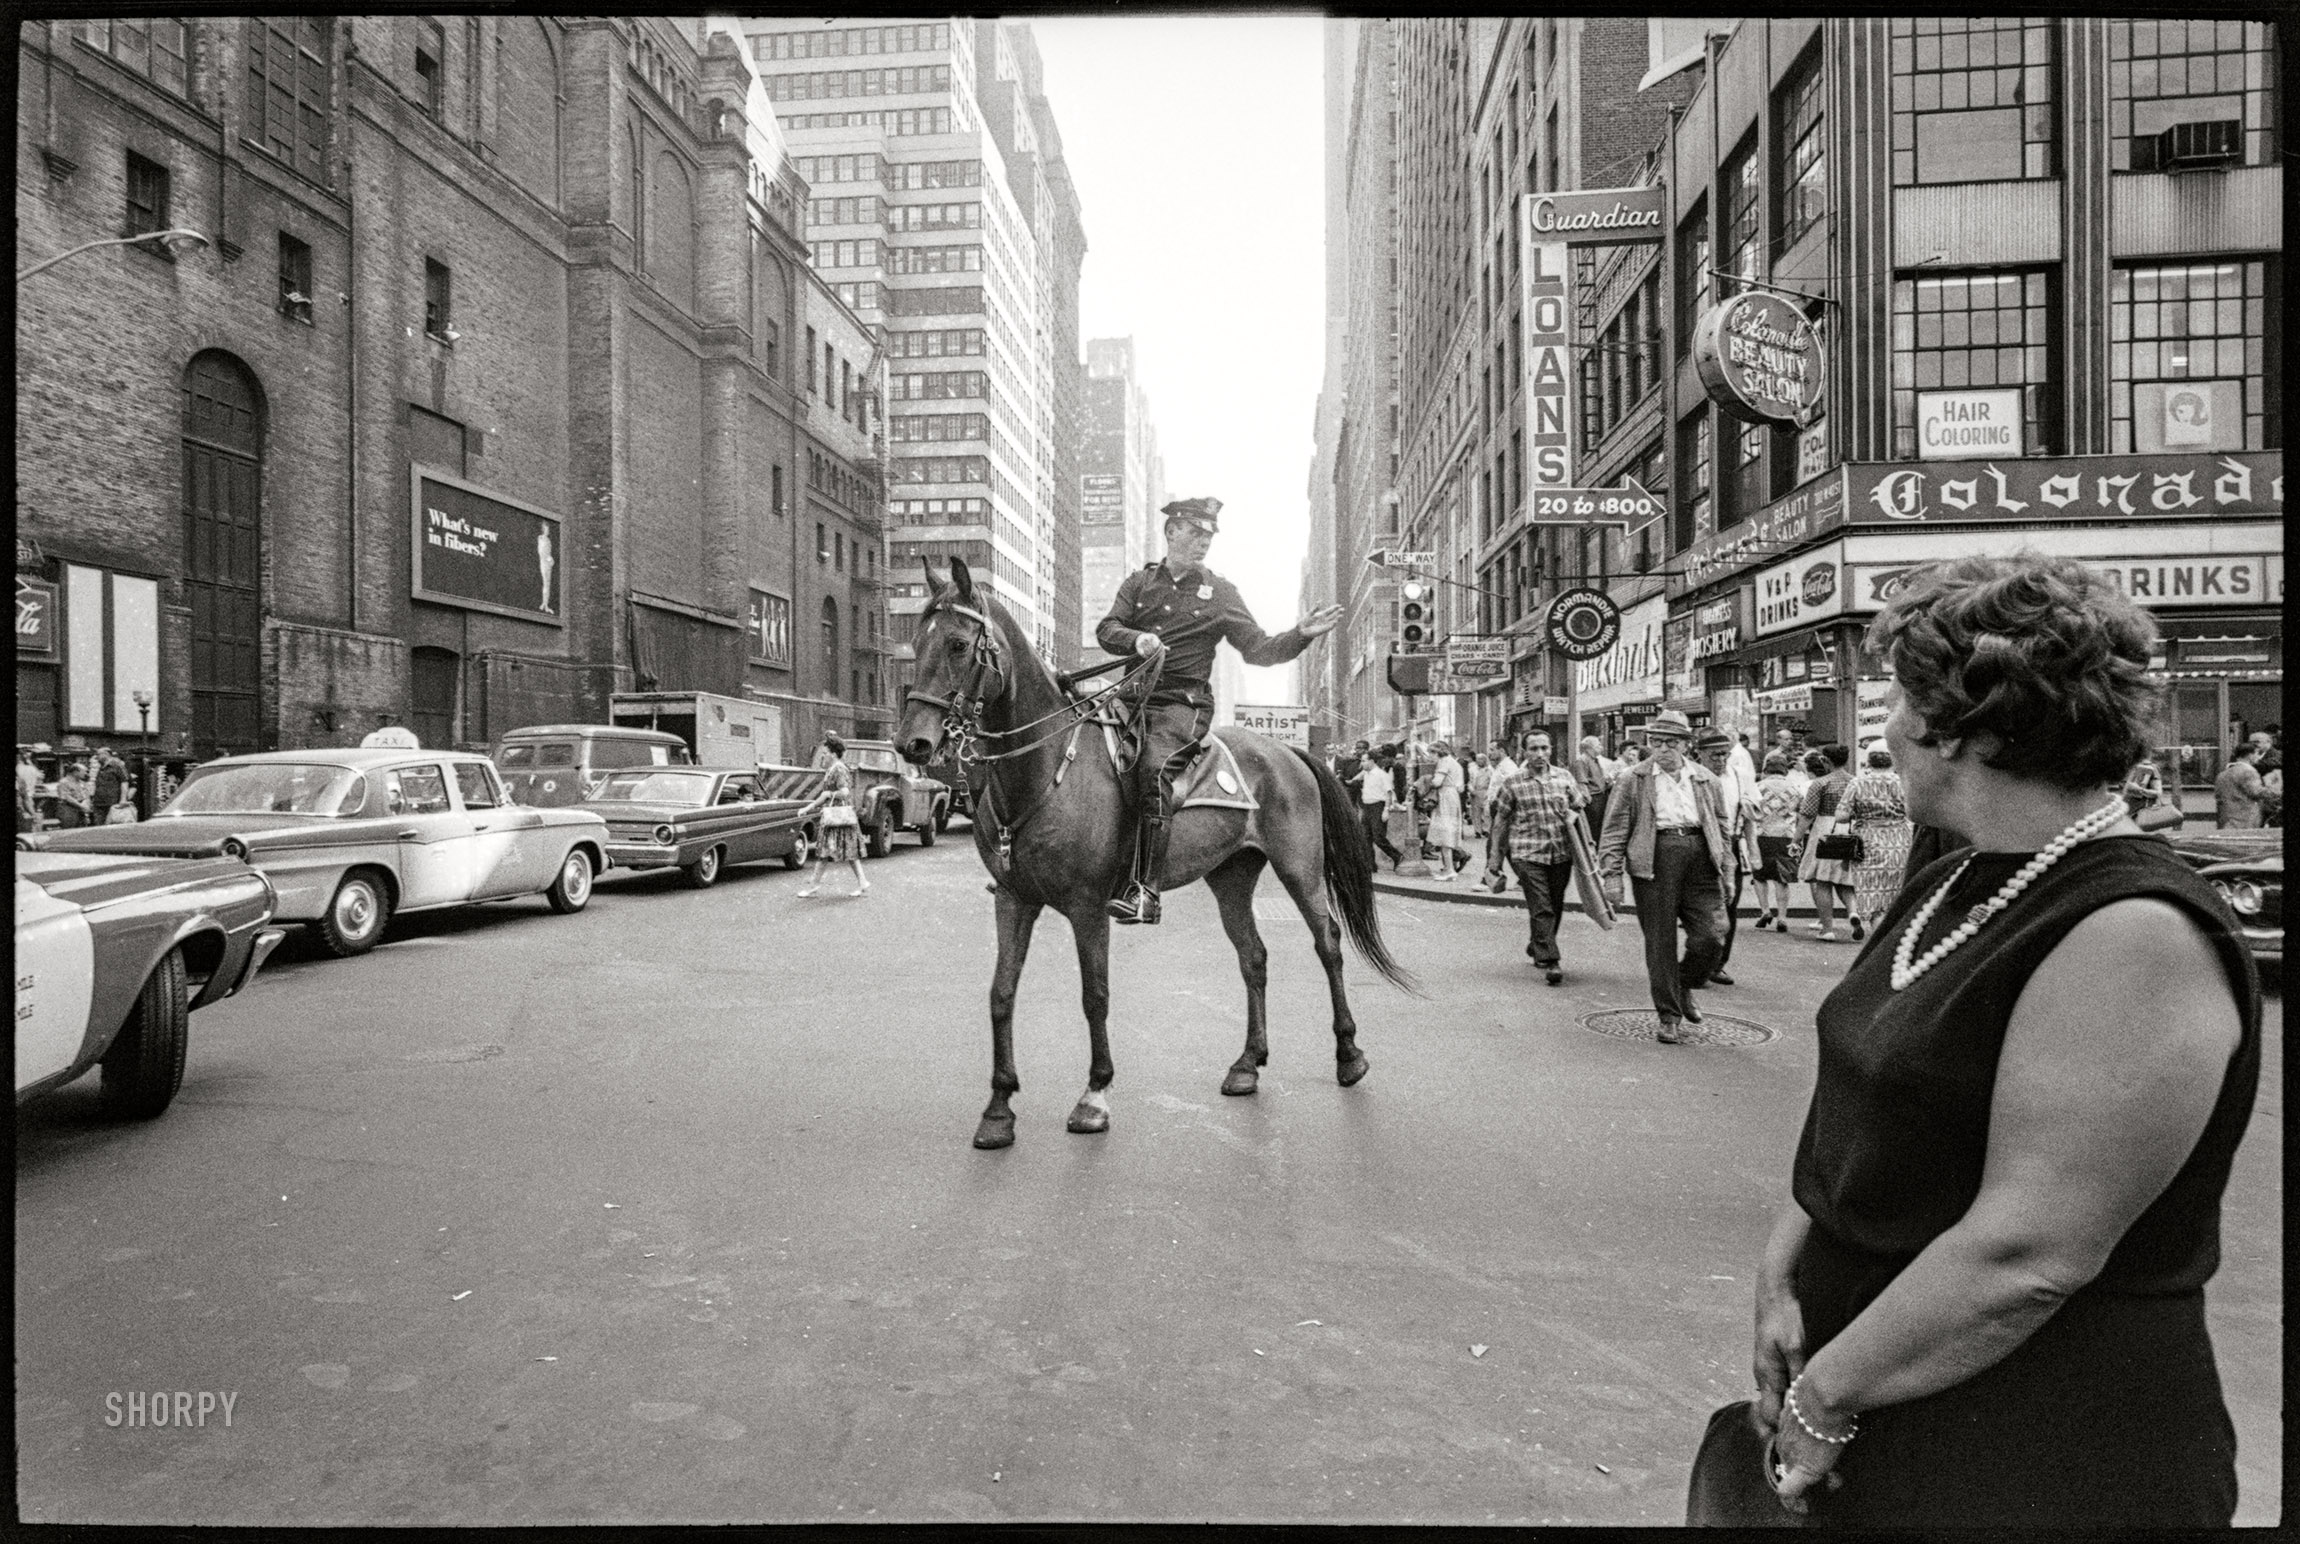 June 1964. New York. "Police officer on horse." Photo by Angelo Rizzuto. View full size.